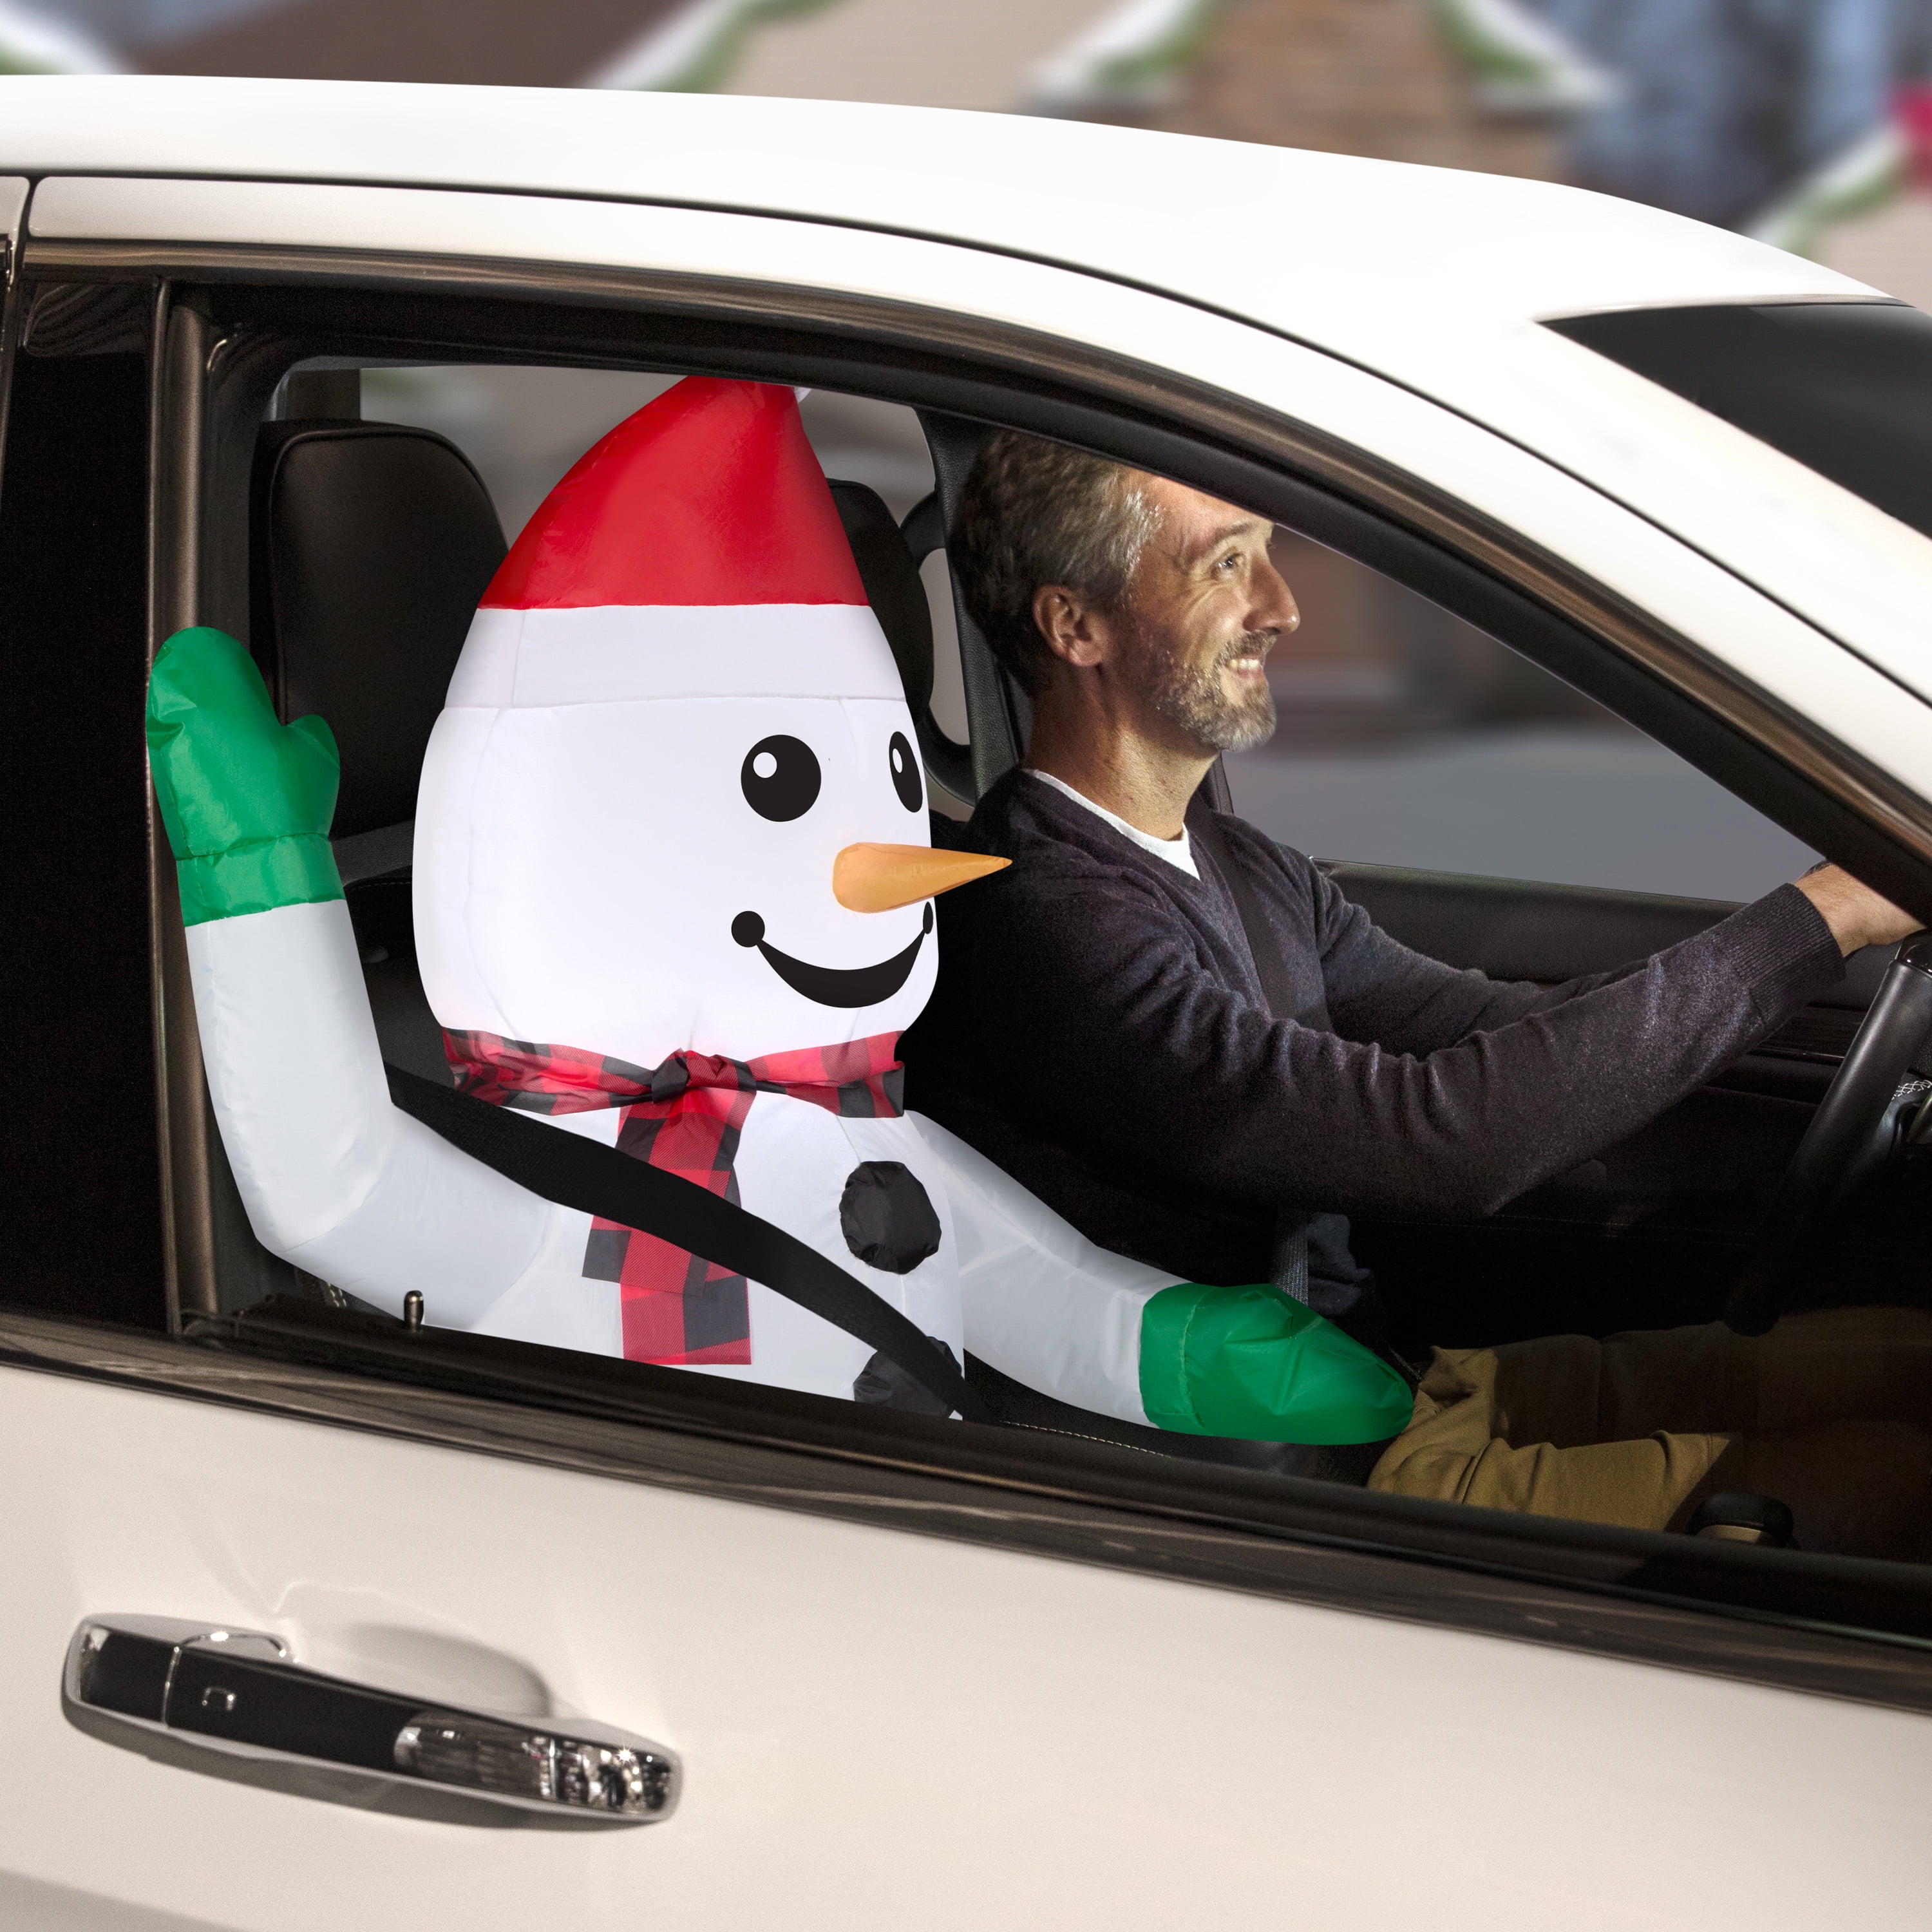 3ft 91cm Snowman Car Buddy Airblown Inflatable Snowman for the Passenger  Seat. LED. for Use in Any Passenger Seat, Self-inflates 